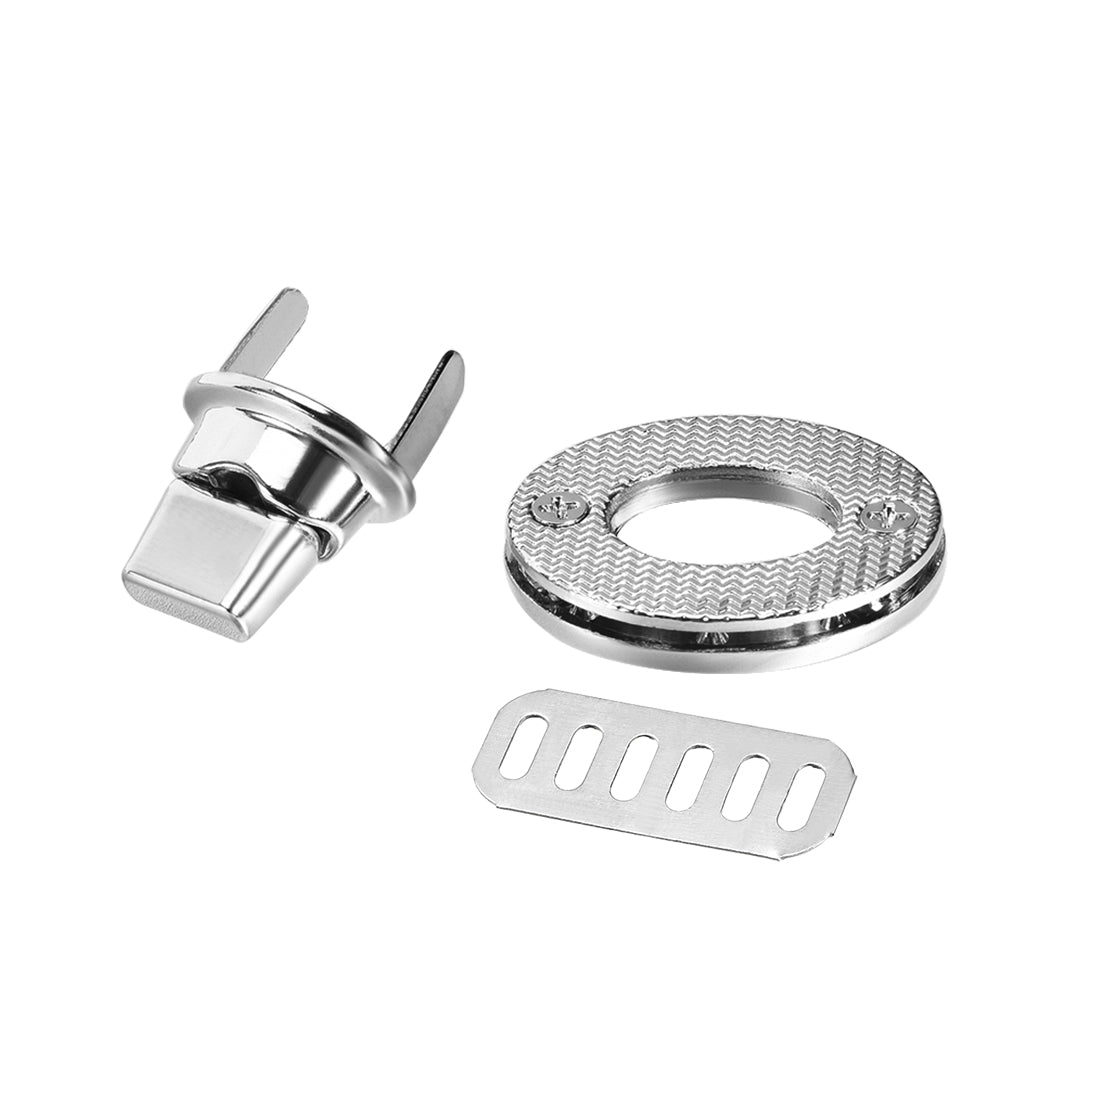 uxcell Uxcell 3 Sets Oval Purses Twist Lock 35mm x 28mm Clutches Closures for DIY Bag Making - Silver